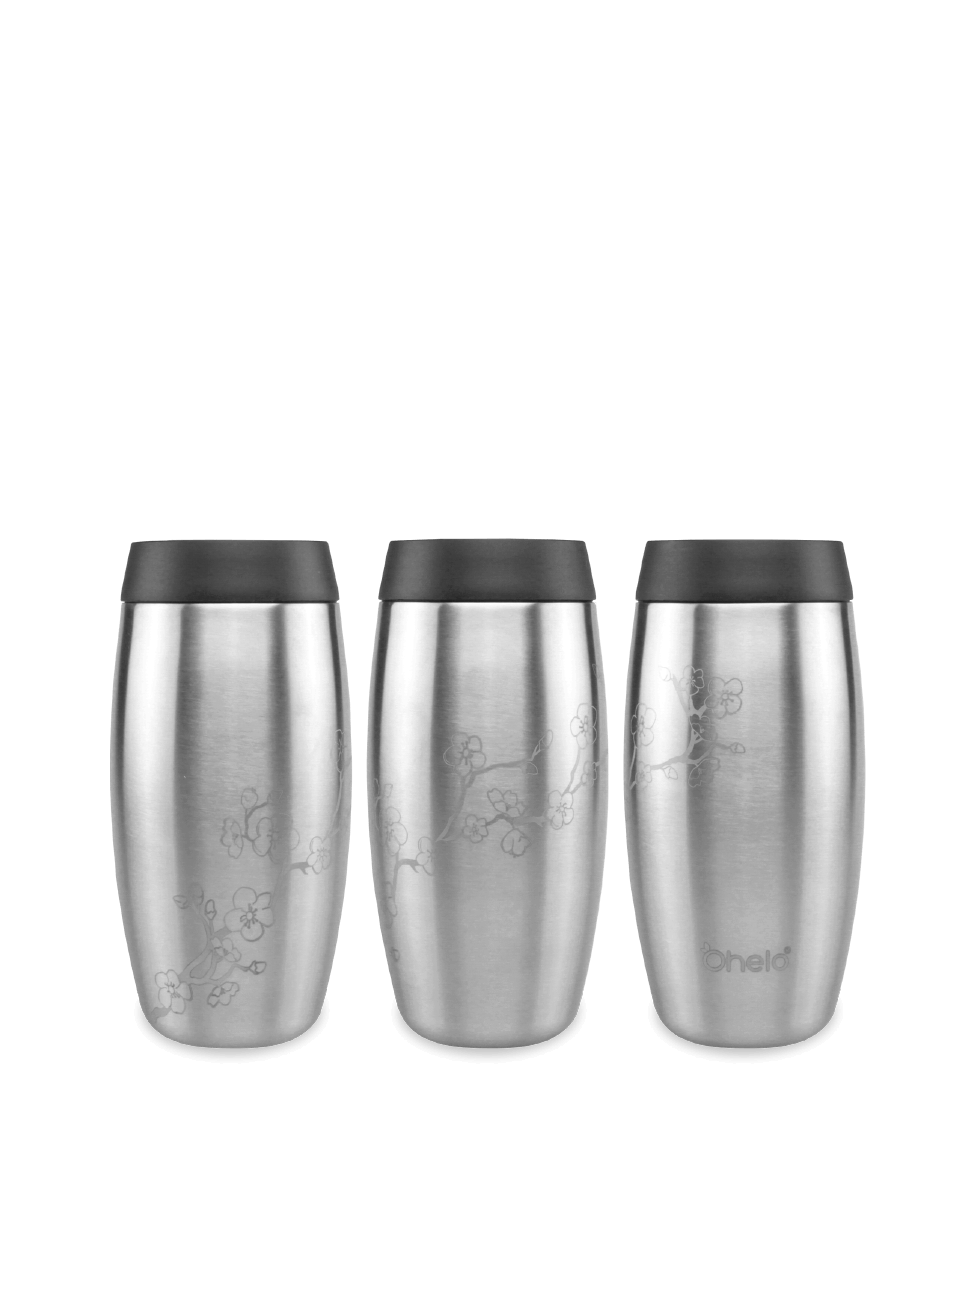 Ohelo stainless steel travel mug in bee design - image showing design from 3 sides